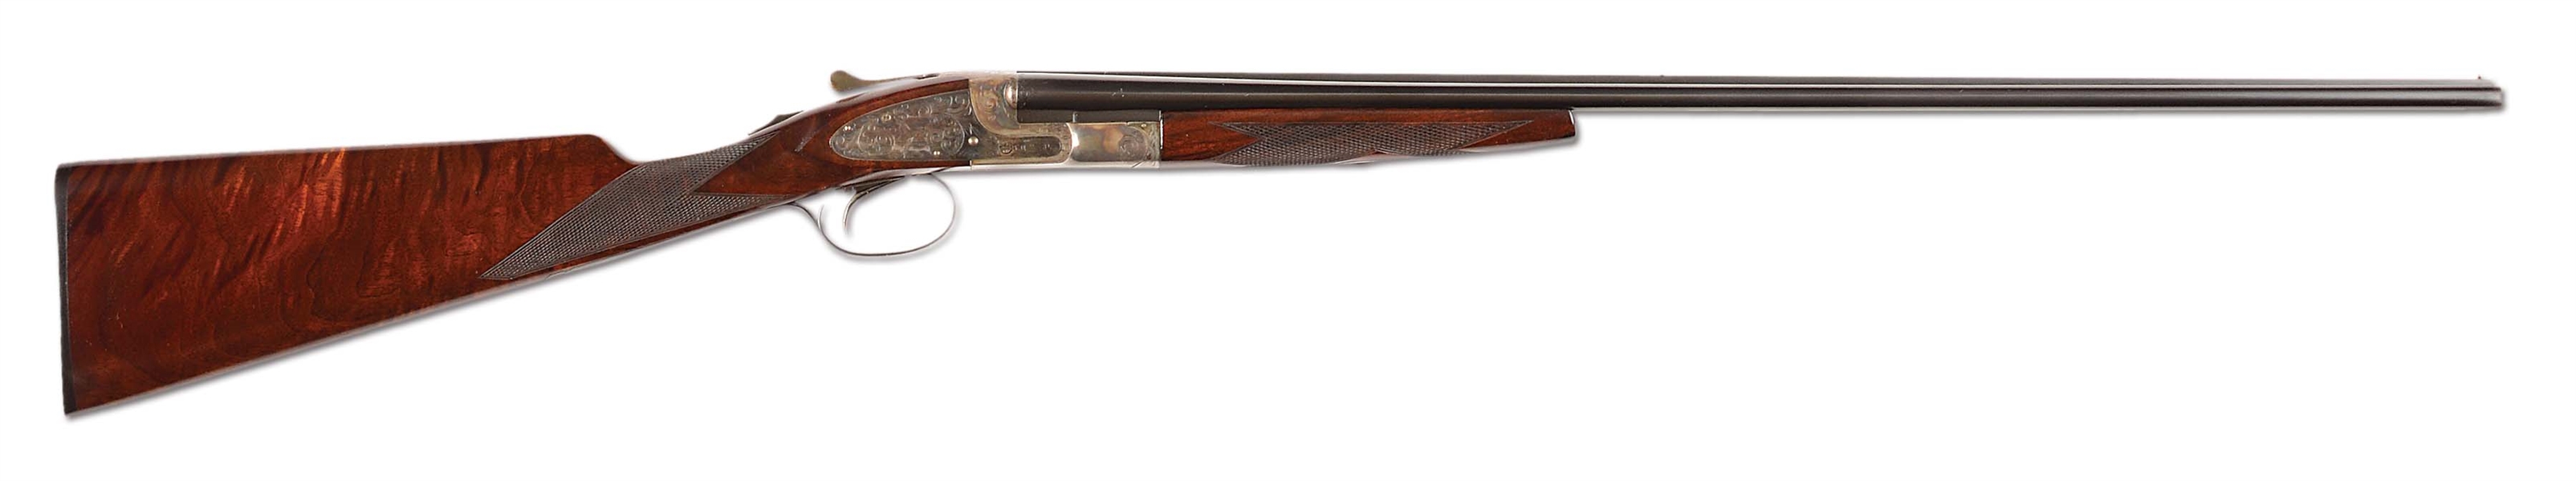 (C) EXTREMELY RARE L.C. SMITH SPECIALTY GRADE FEATHERWEIGHT .410 BORE SIDE BY SIDE SHOTGUN.